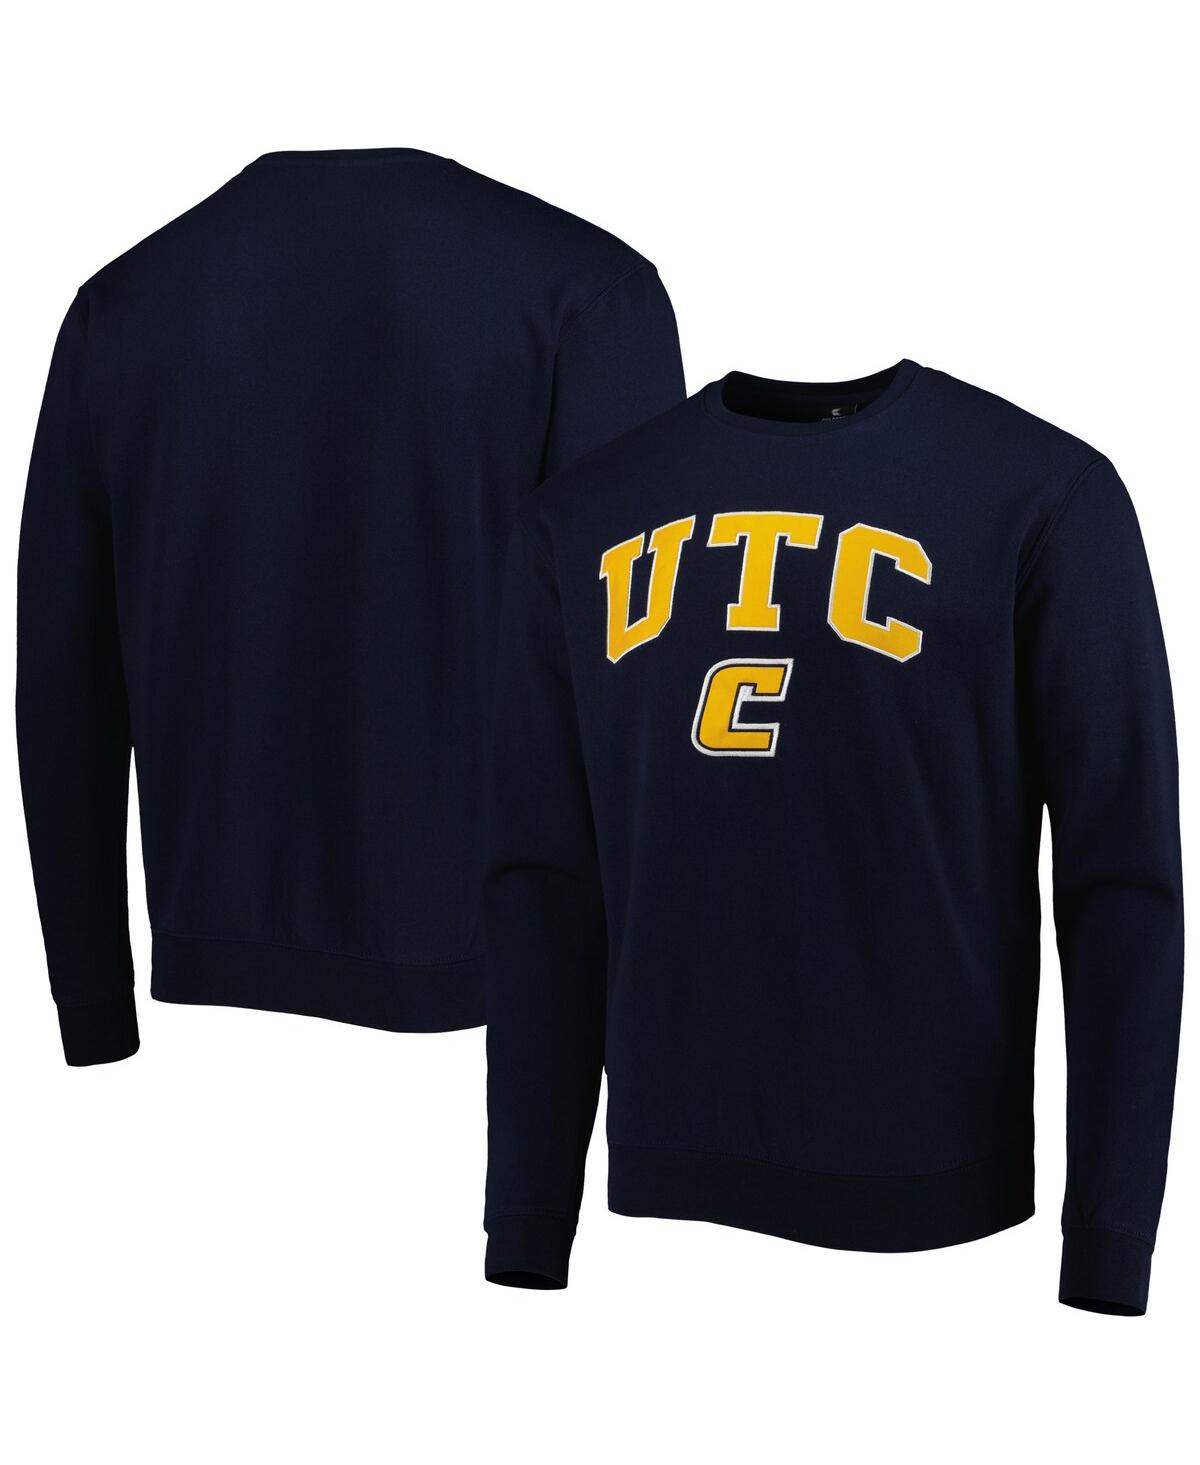 Shop Colosseum Men's  Navy Tennessee Chattanooga Mocs Arch Over Logo Pullover Sweatshirt